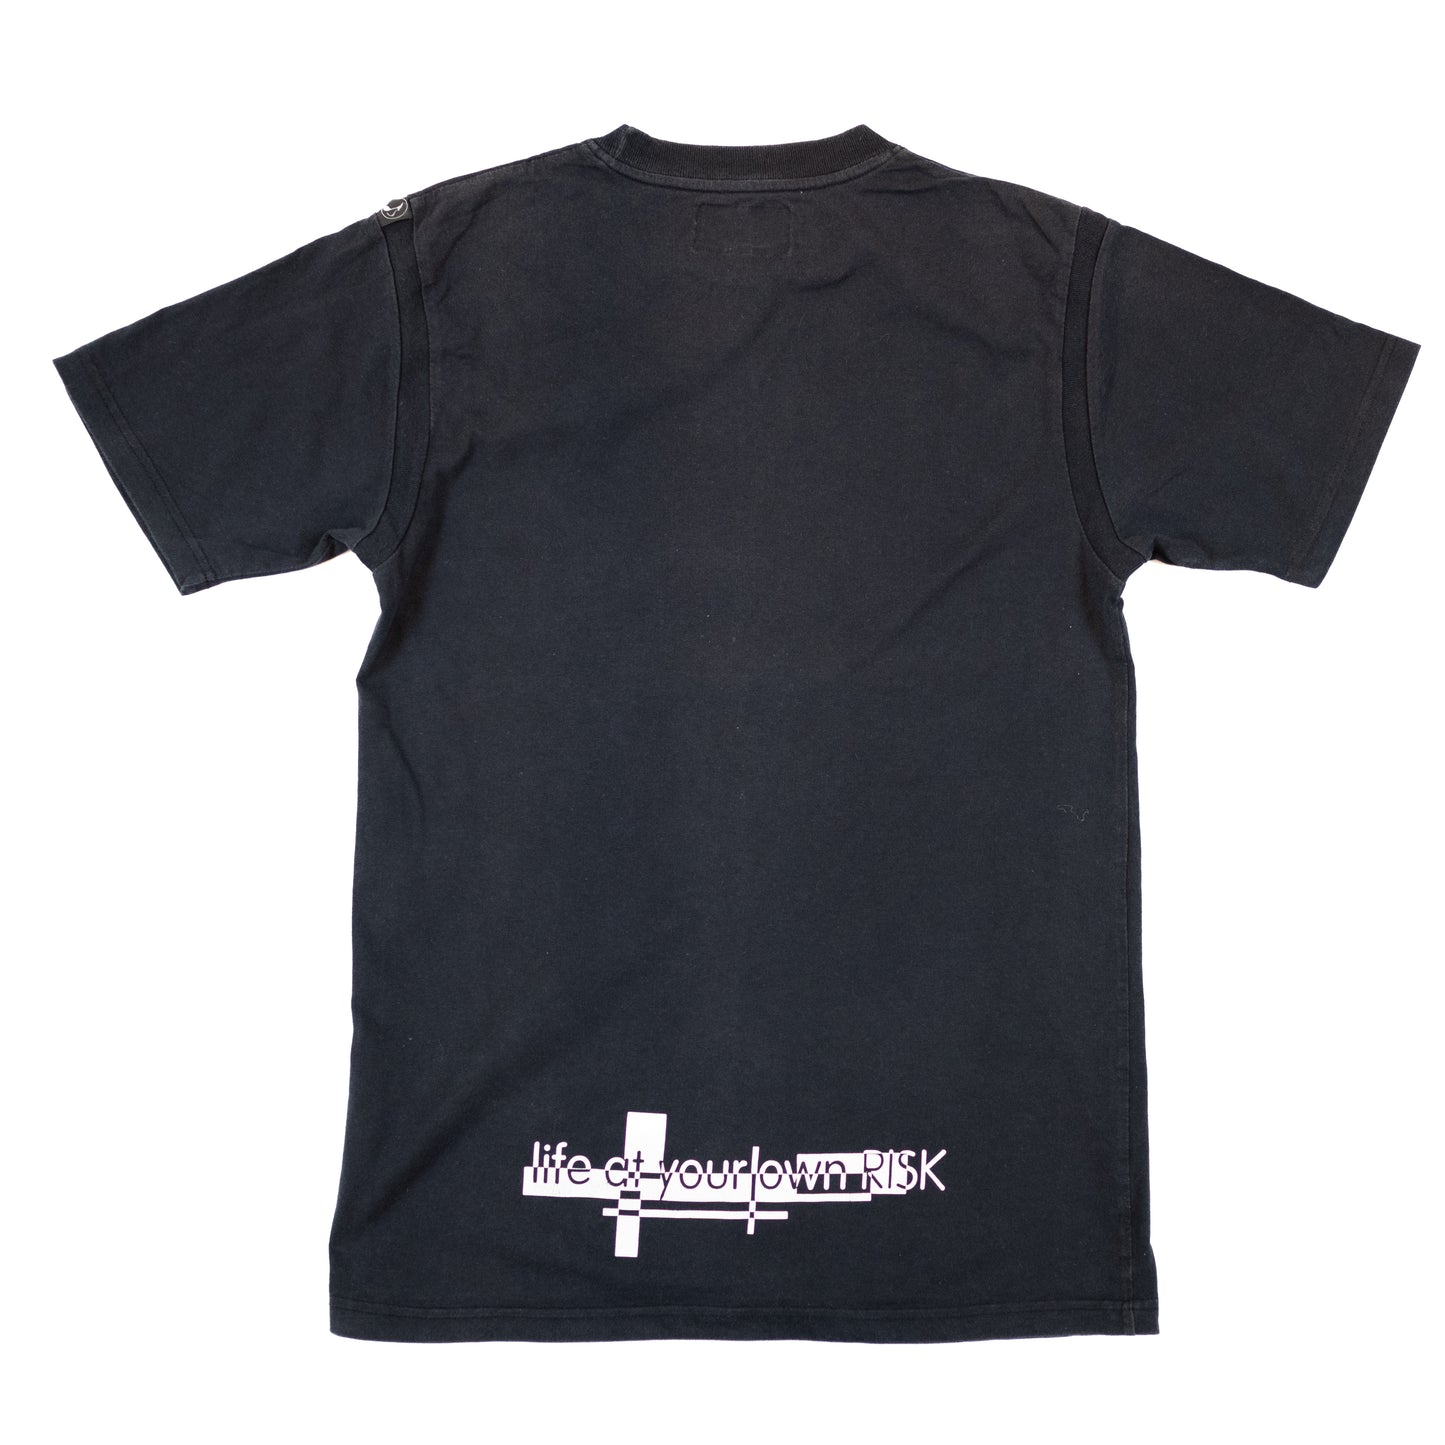 Undercover x Risk 10 Year Anniversary 'Undercoverisk' T-Shirt